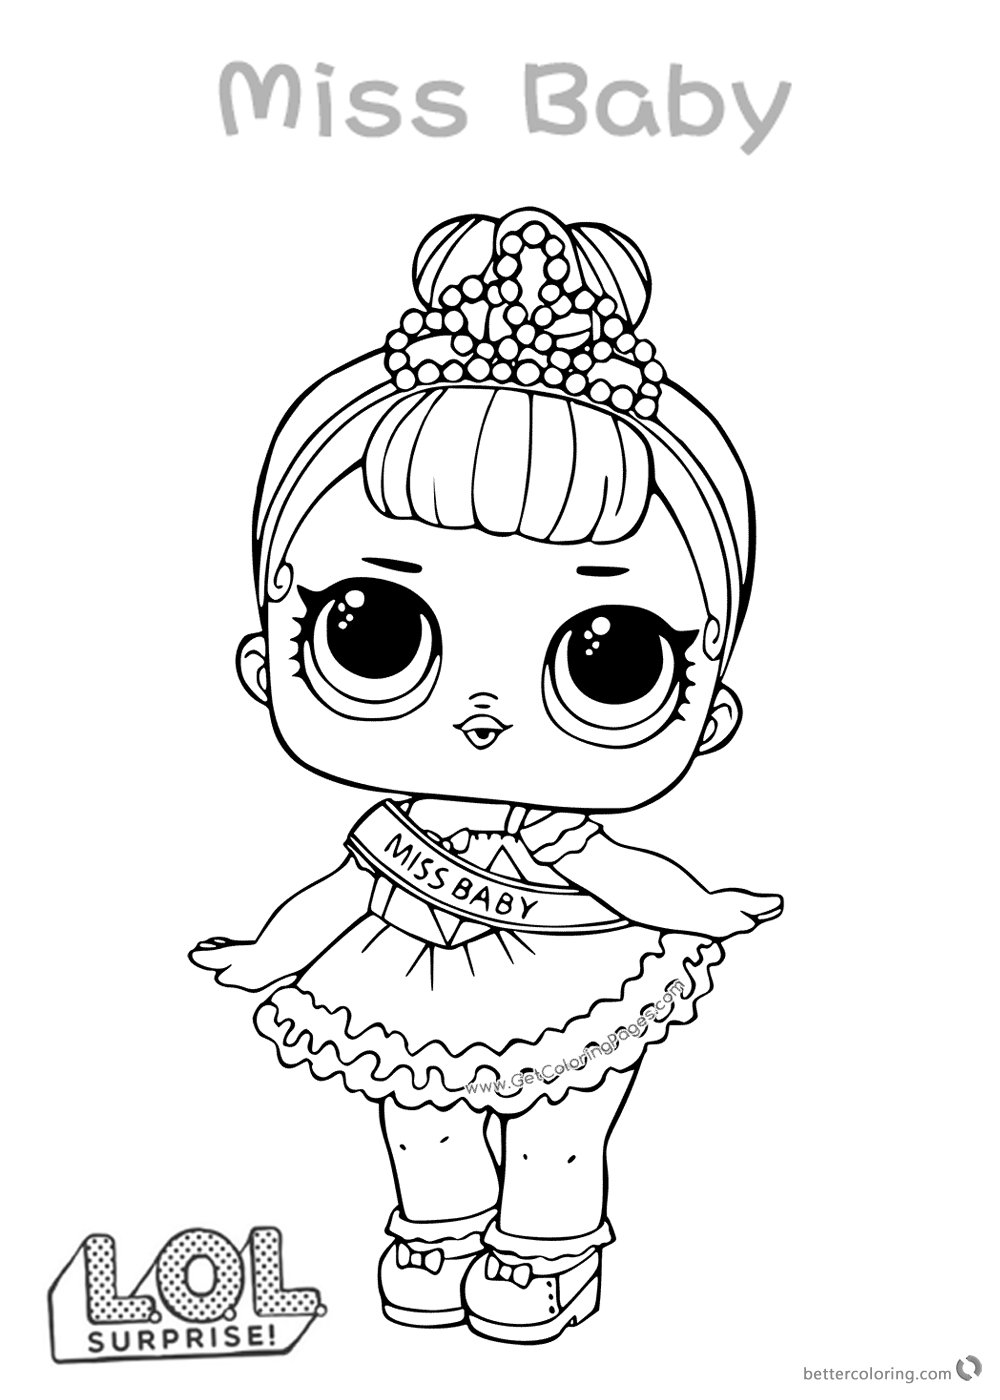 LOL Surprise Doll Coloring Pages Miss Baby - Free Printable Coloring Pages